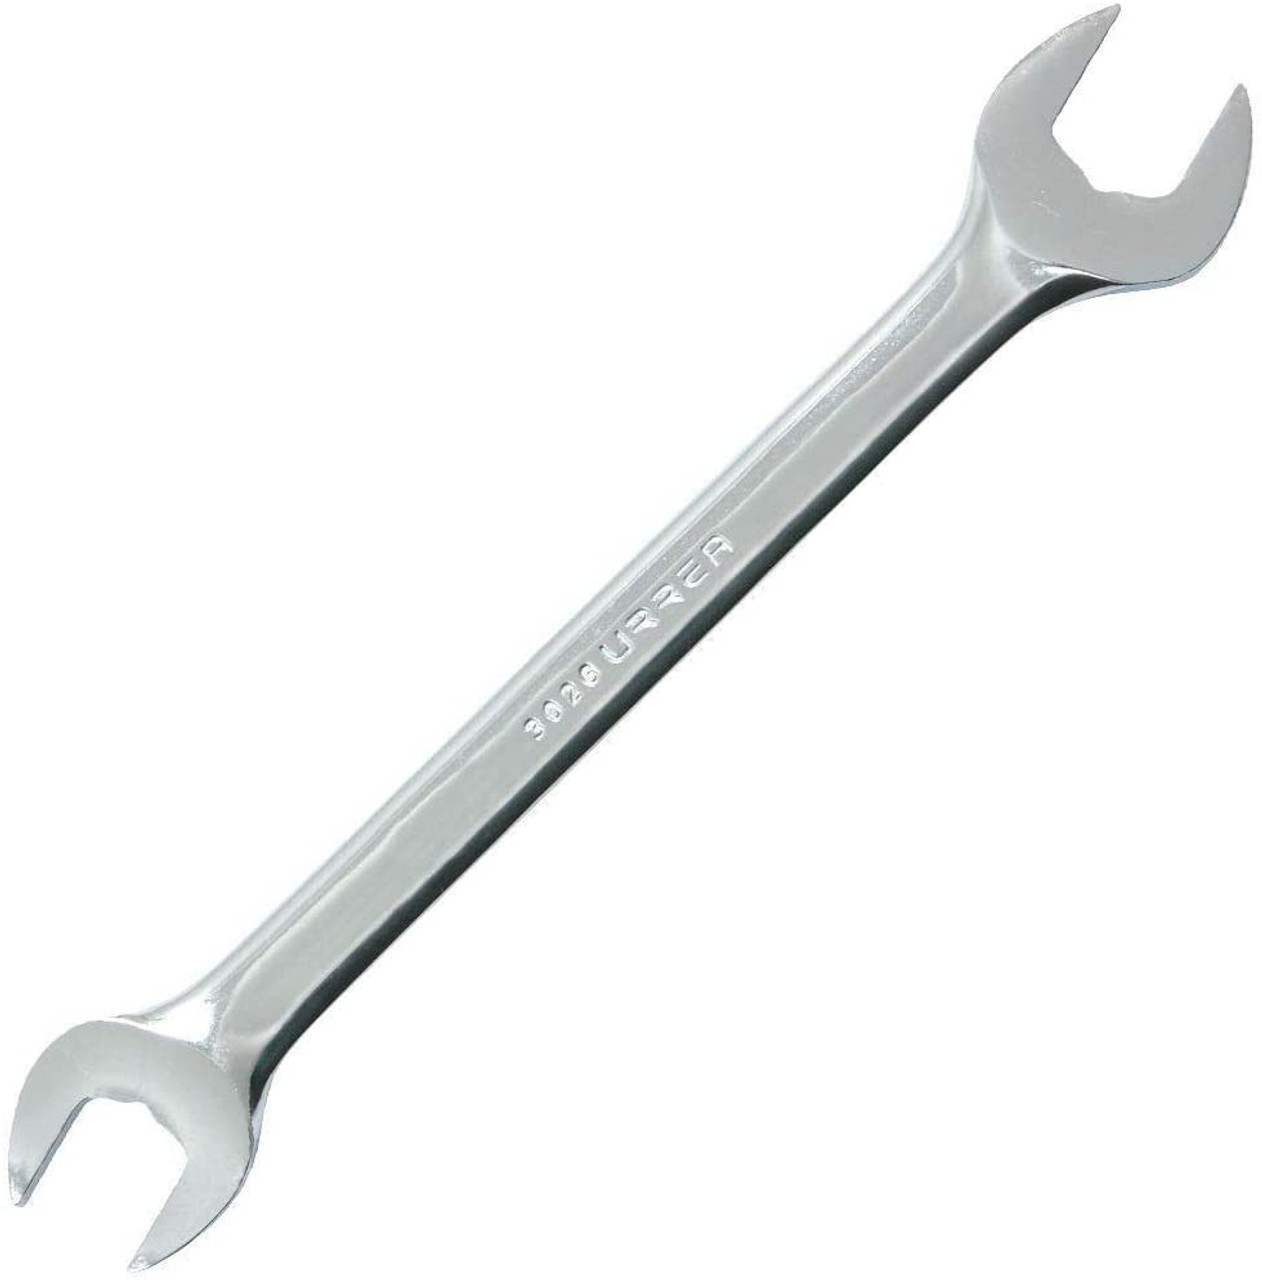 Full polished  Open-End wrench, Size: 8 x 10 mm, Total Length: 5-1/8"